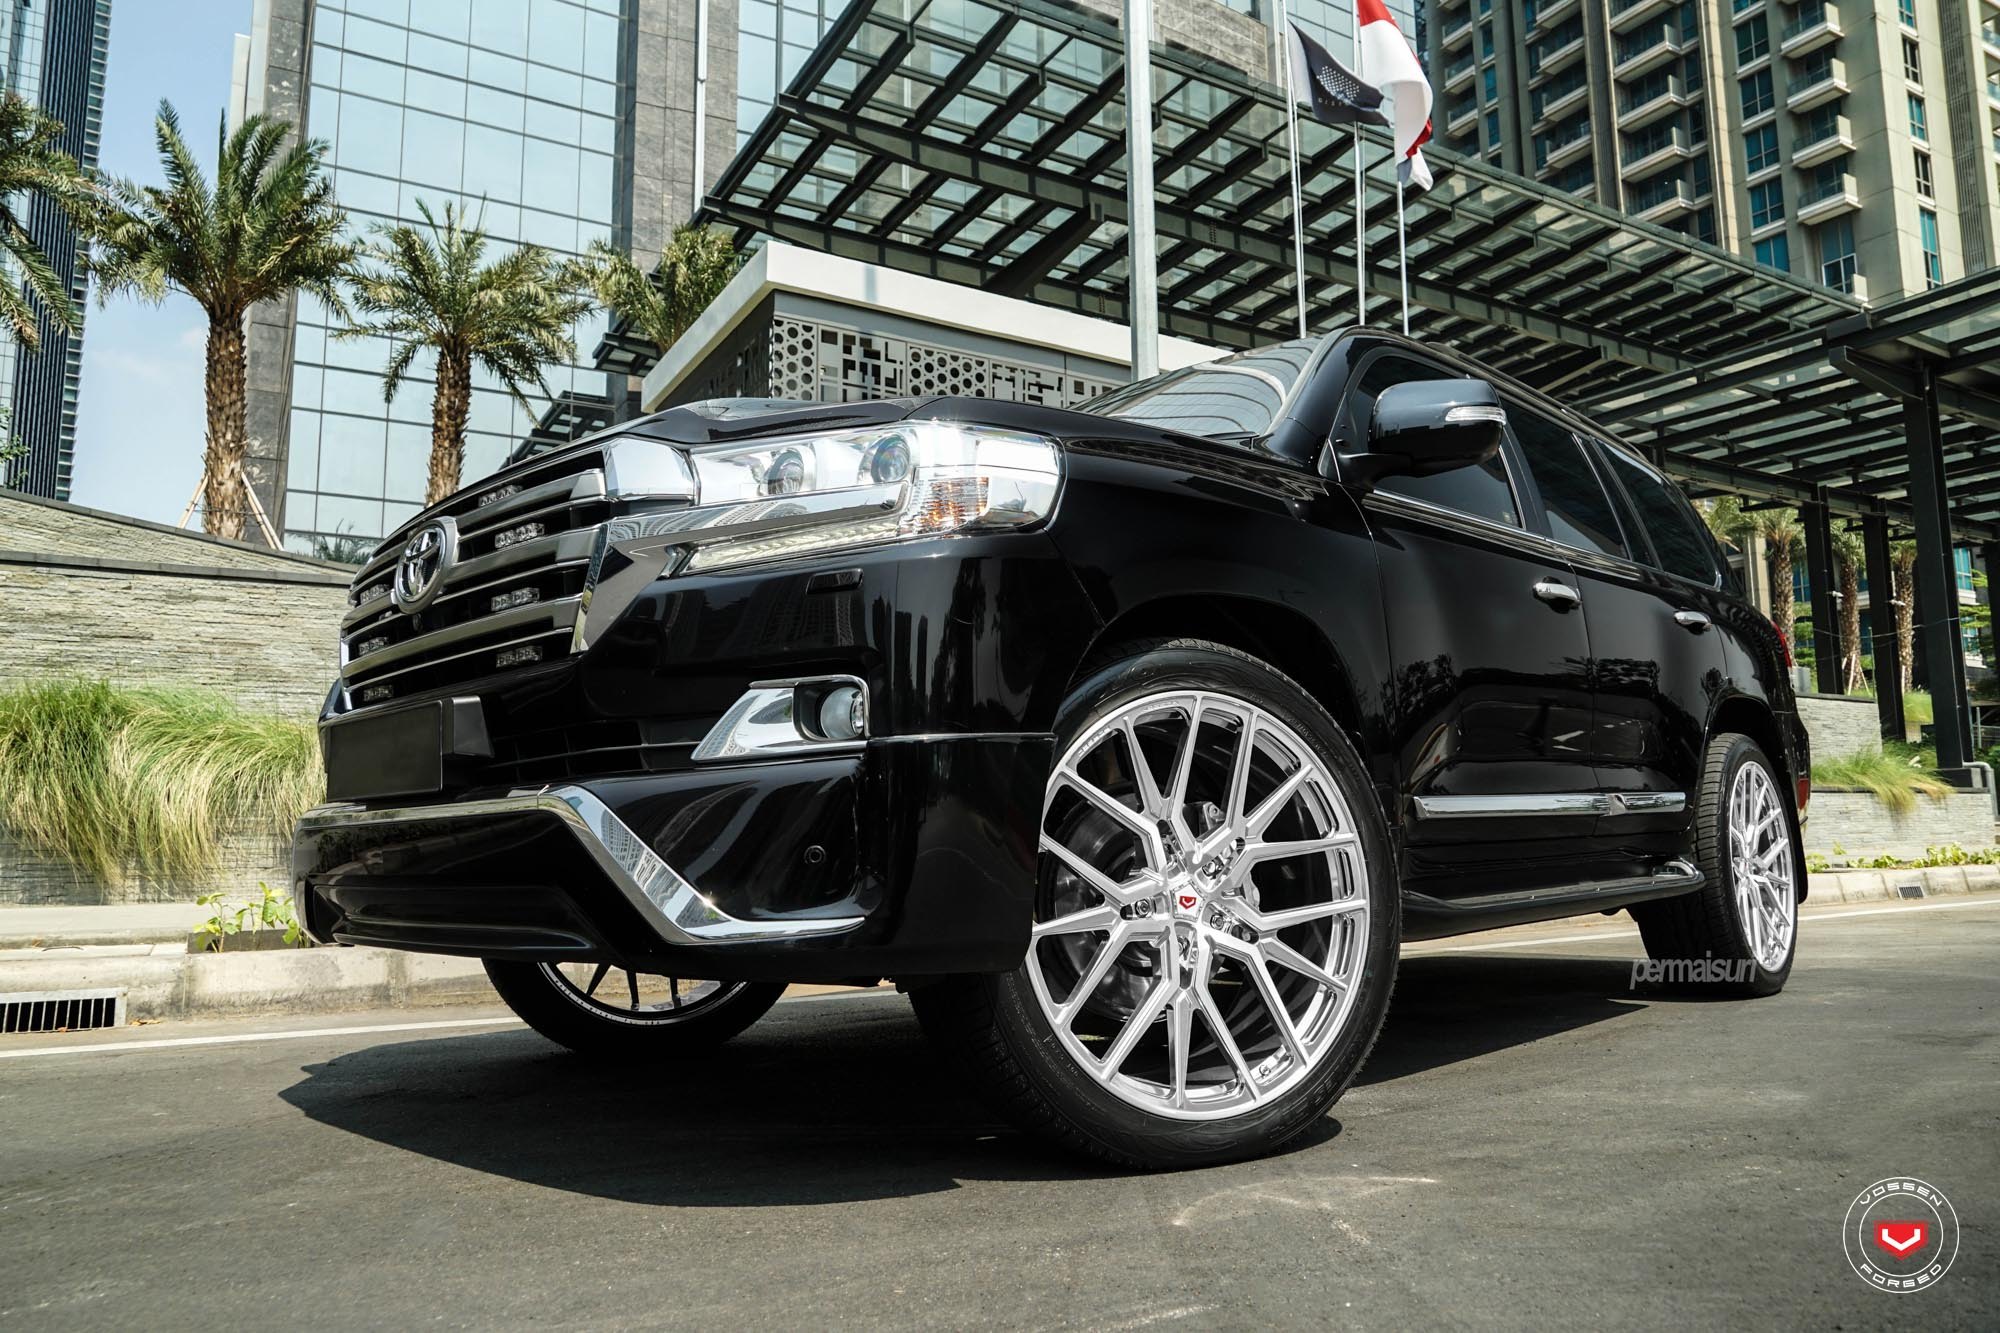 Black Toyota Land Cruiser with Chrome Accents - Photo by Vossen